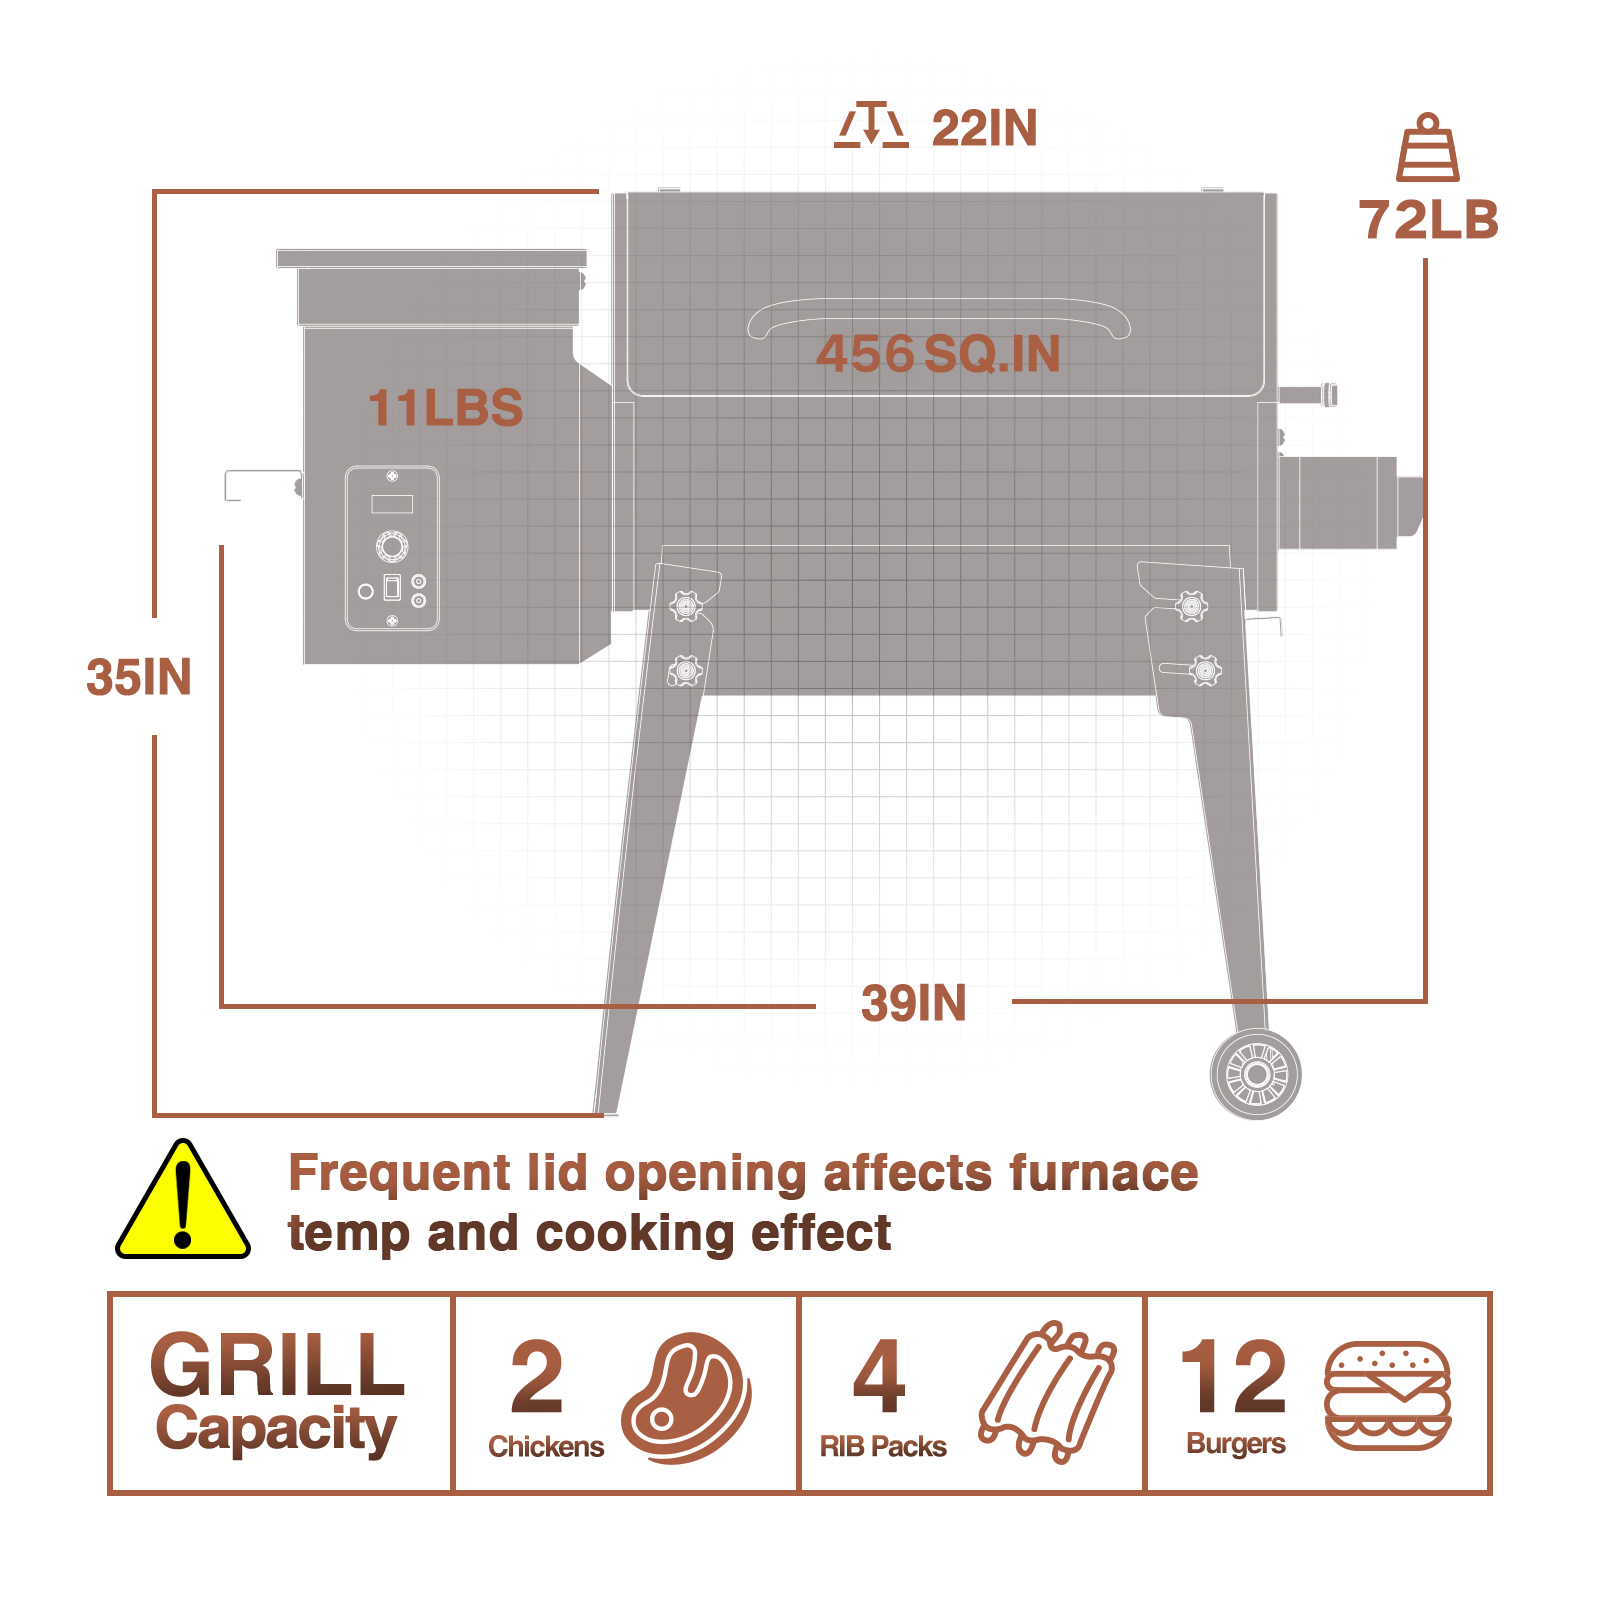 KingChii Wood Pellet Grill & Smoker 456sq.in., 8-in-1 Multifunctional BBQ Grill with Automatic temperature control for Outdoor Cooking, Foldable Legs - image 4 of 10